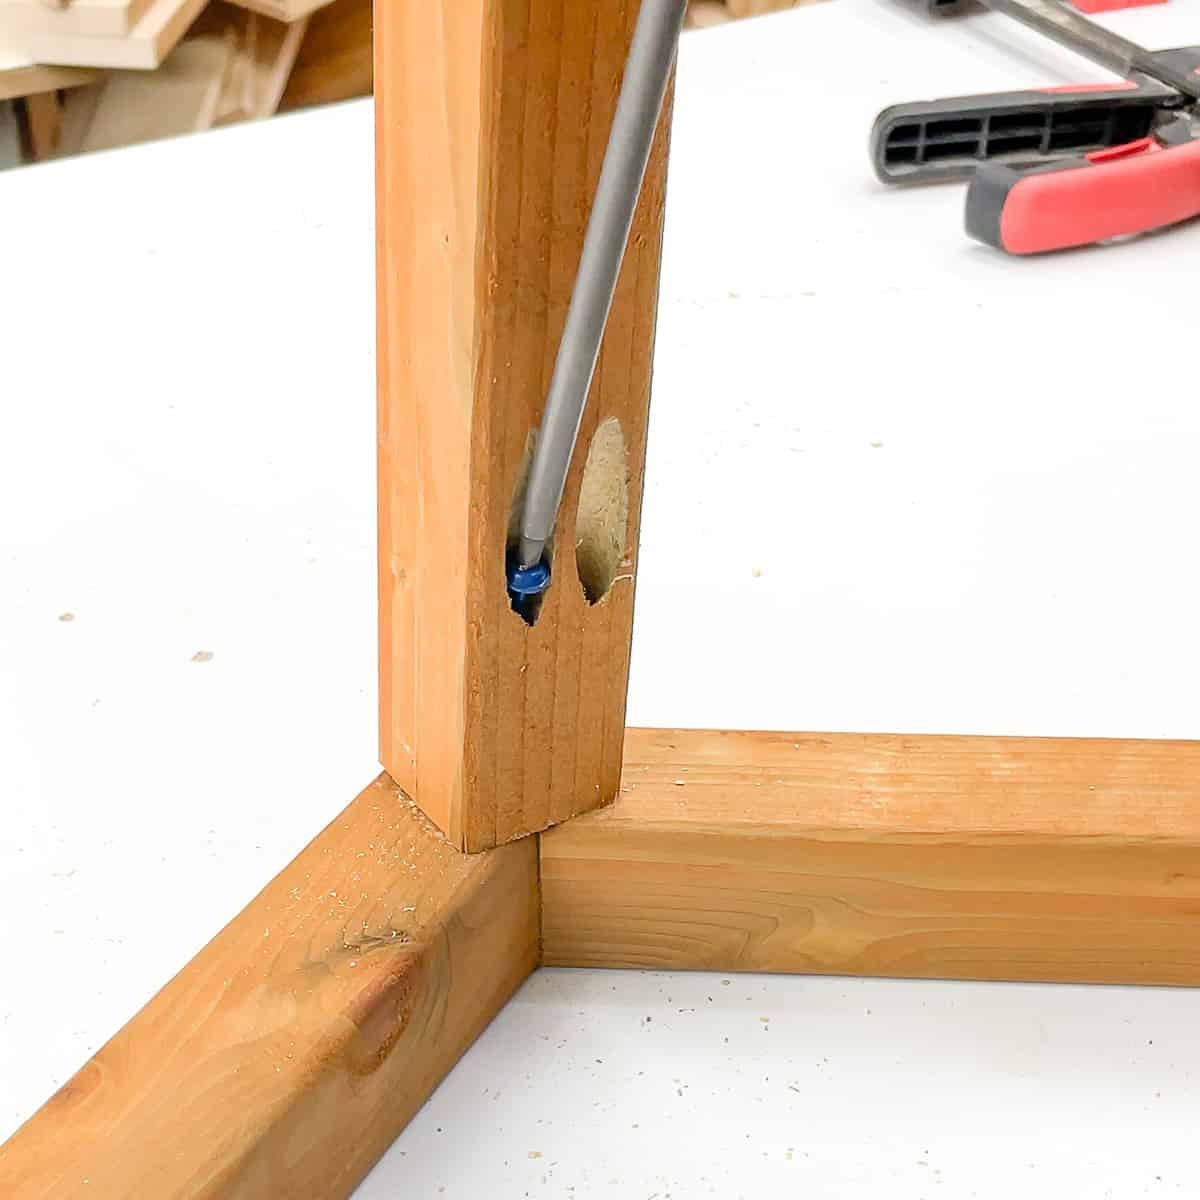 attaching the two angled roof pieces together with pocket hole screws